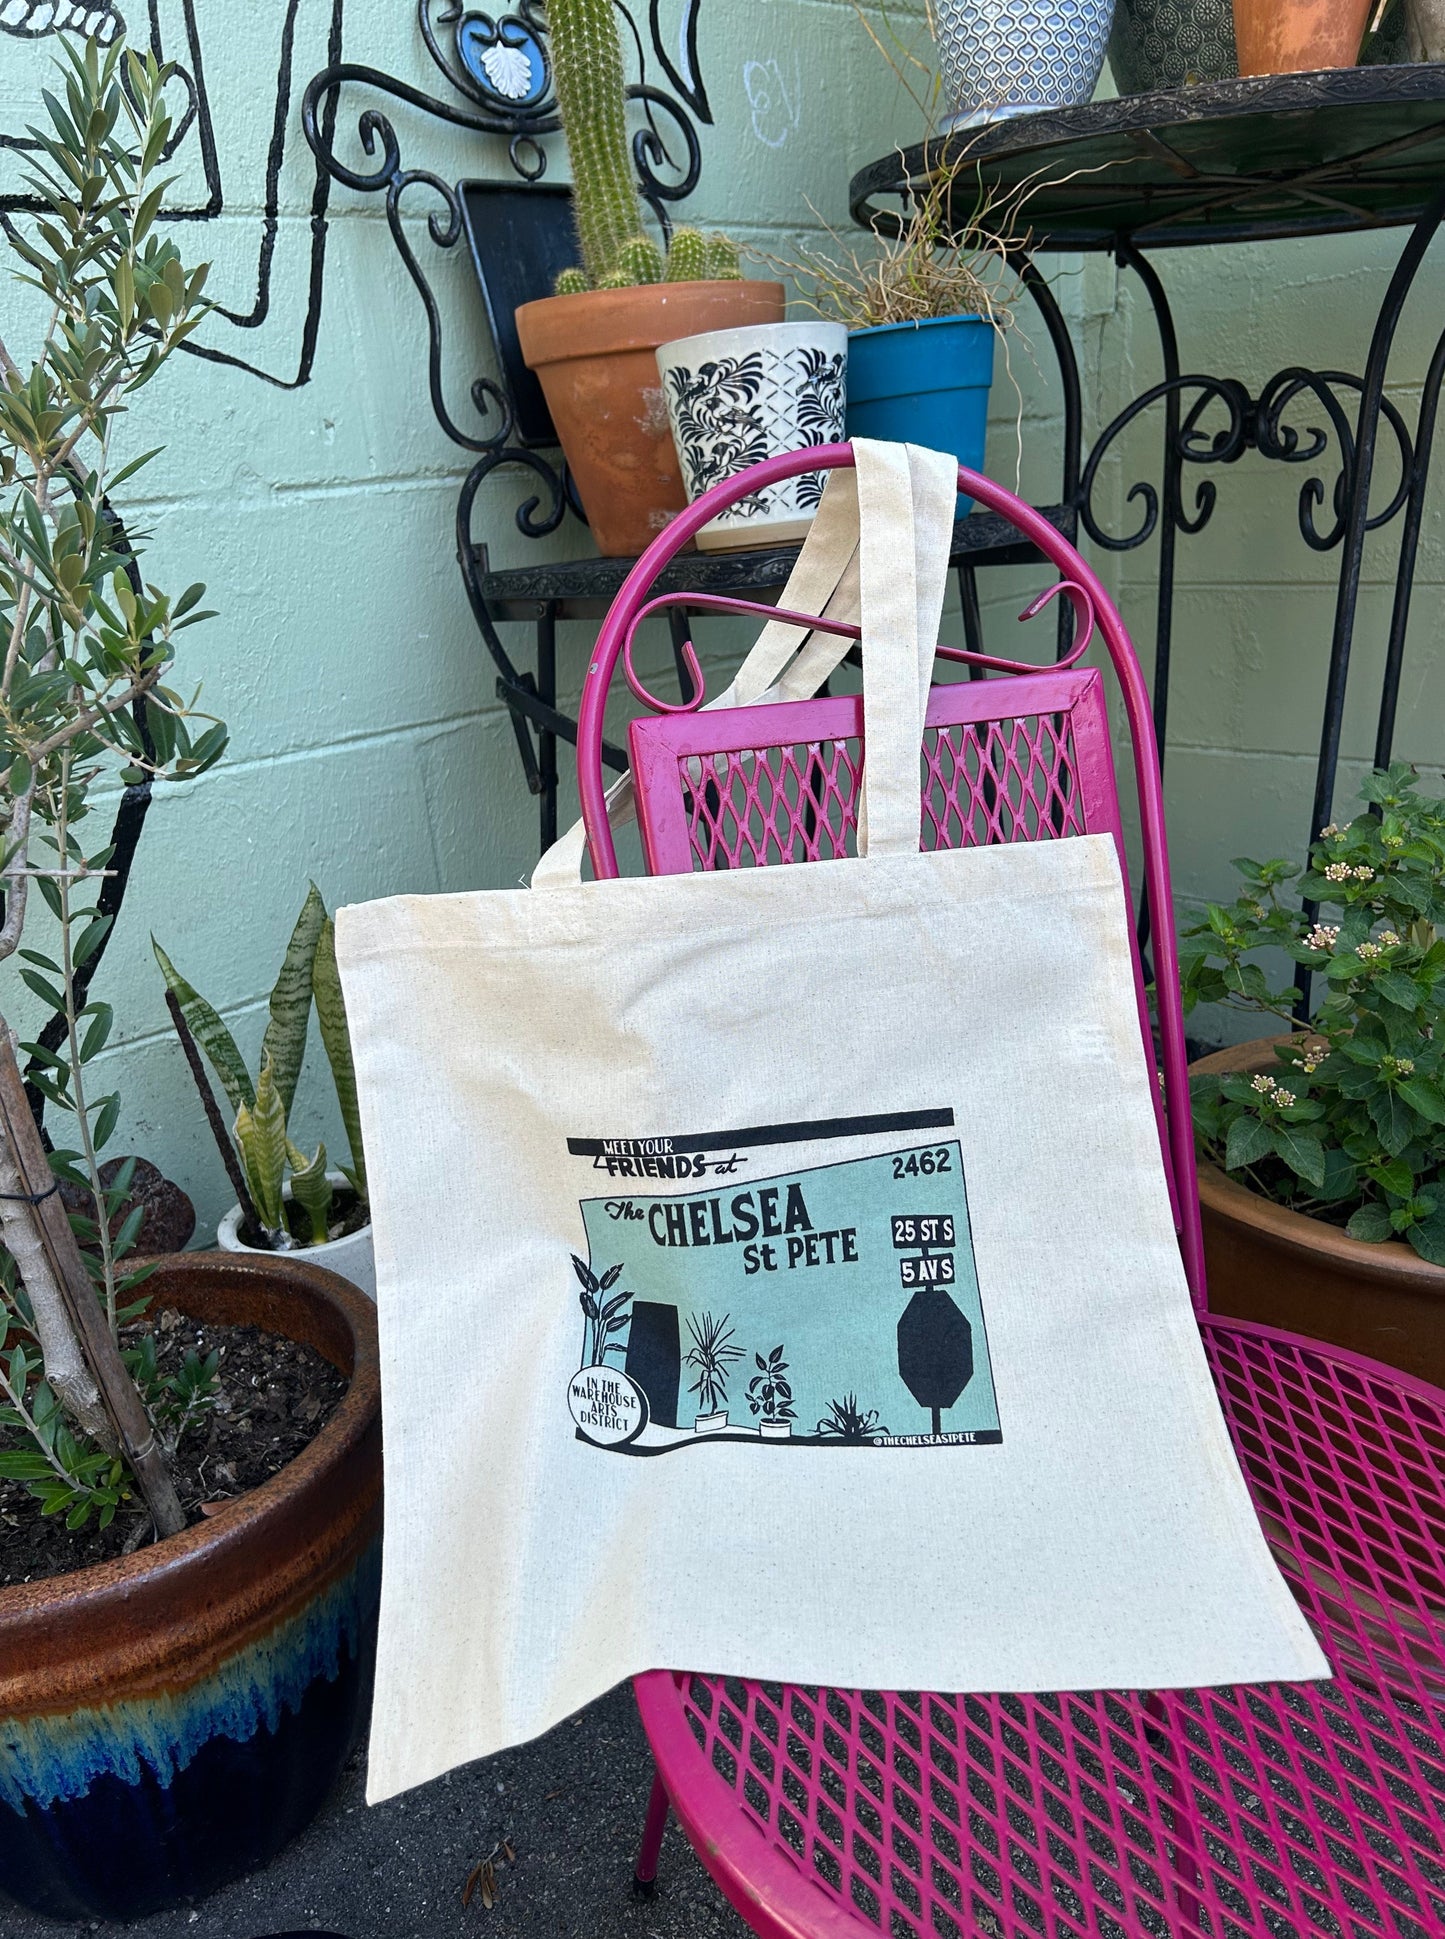 hand screen printed image of the front of the coffee shop on a canvas tote bag